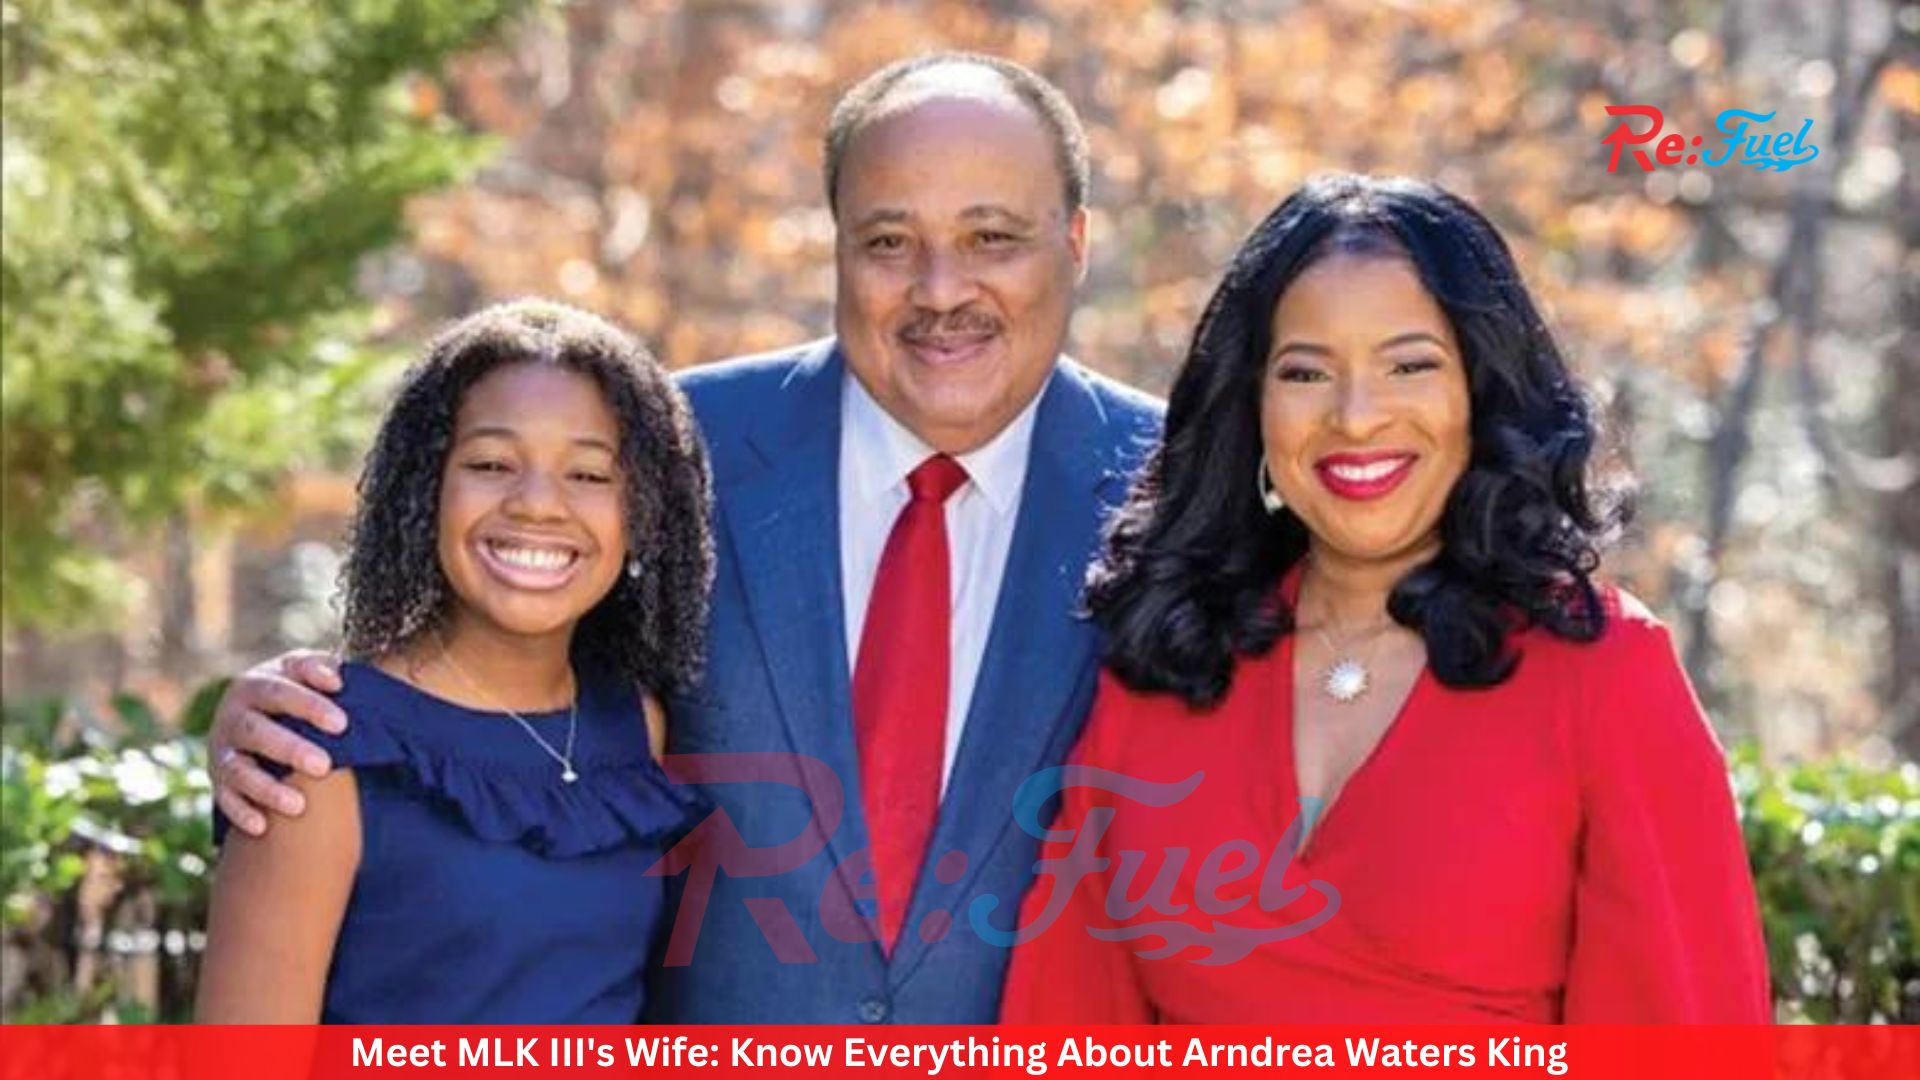 Meet MLK III's Wife: Know Everything About Arndrea Waters King